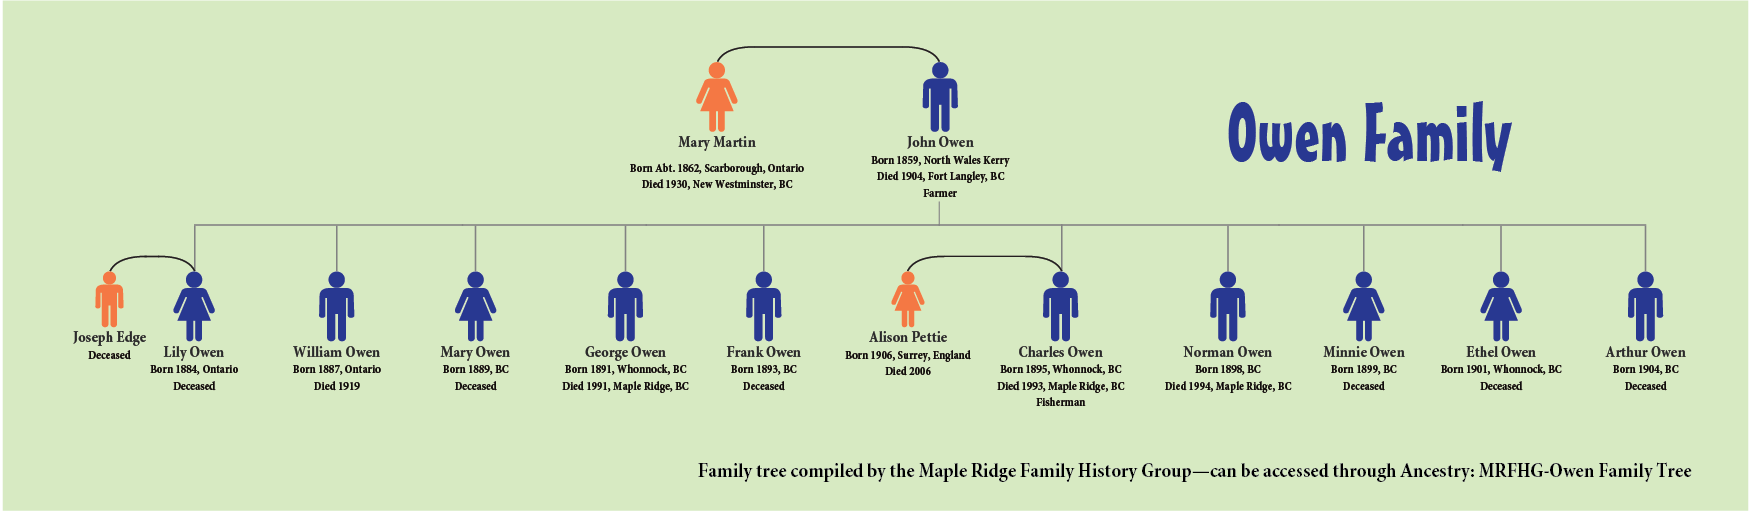 Owen family tree compiled by the Maple Ridge Family History Group